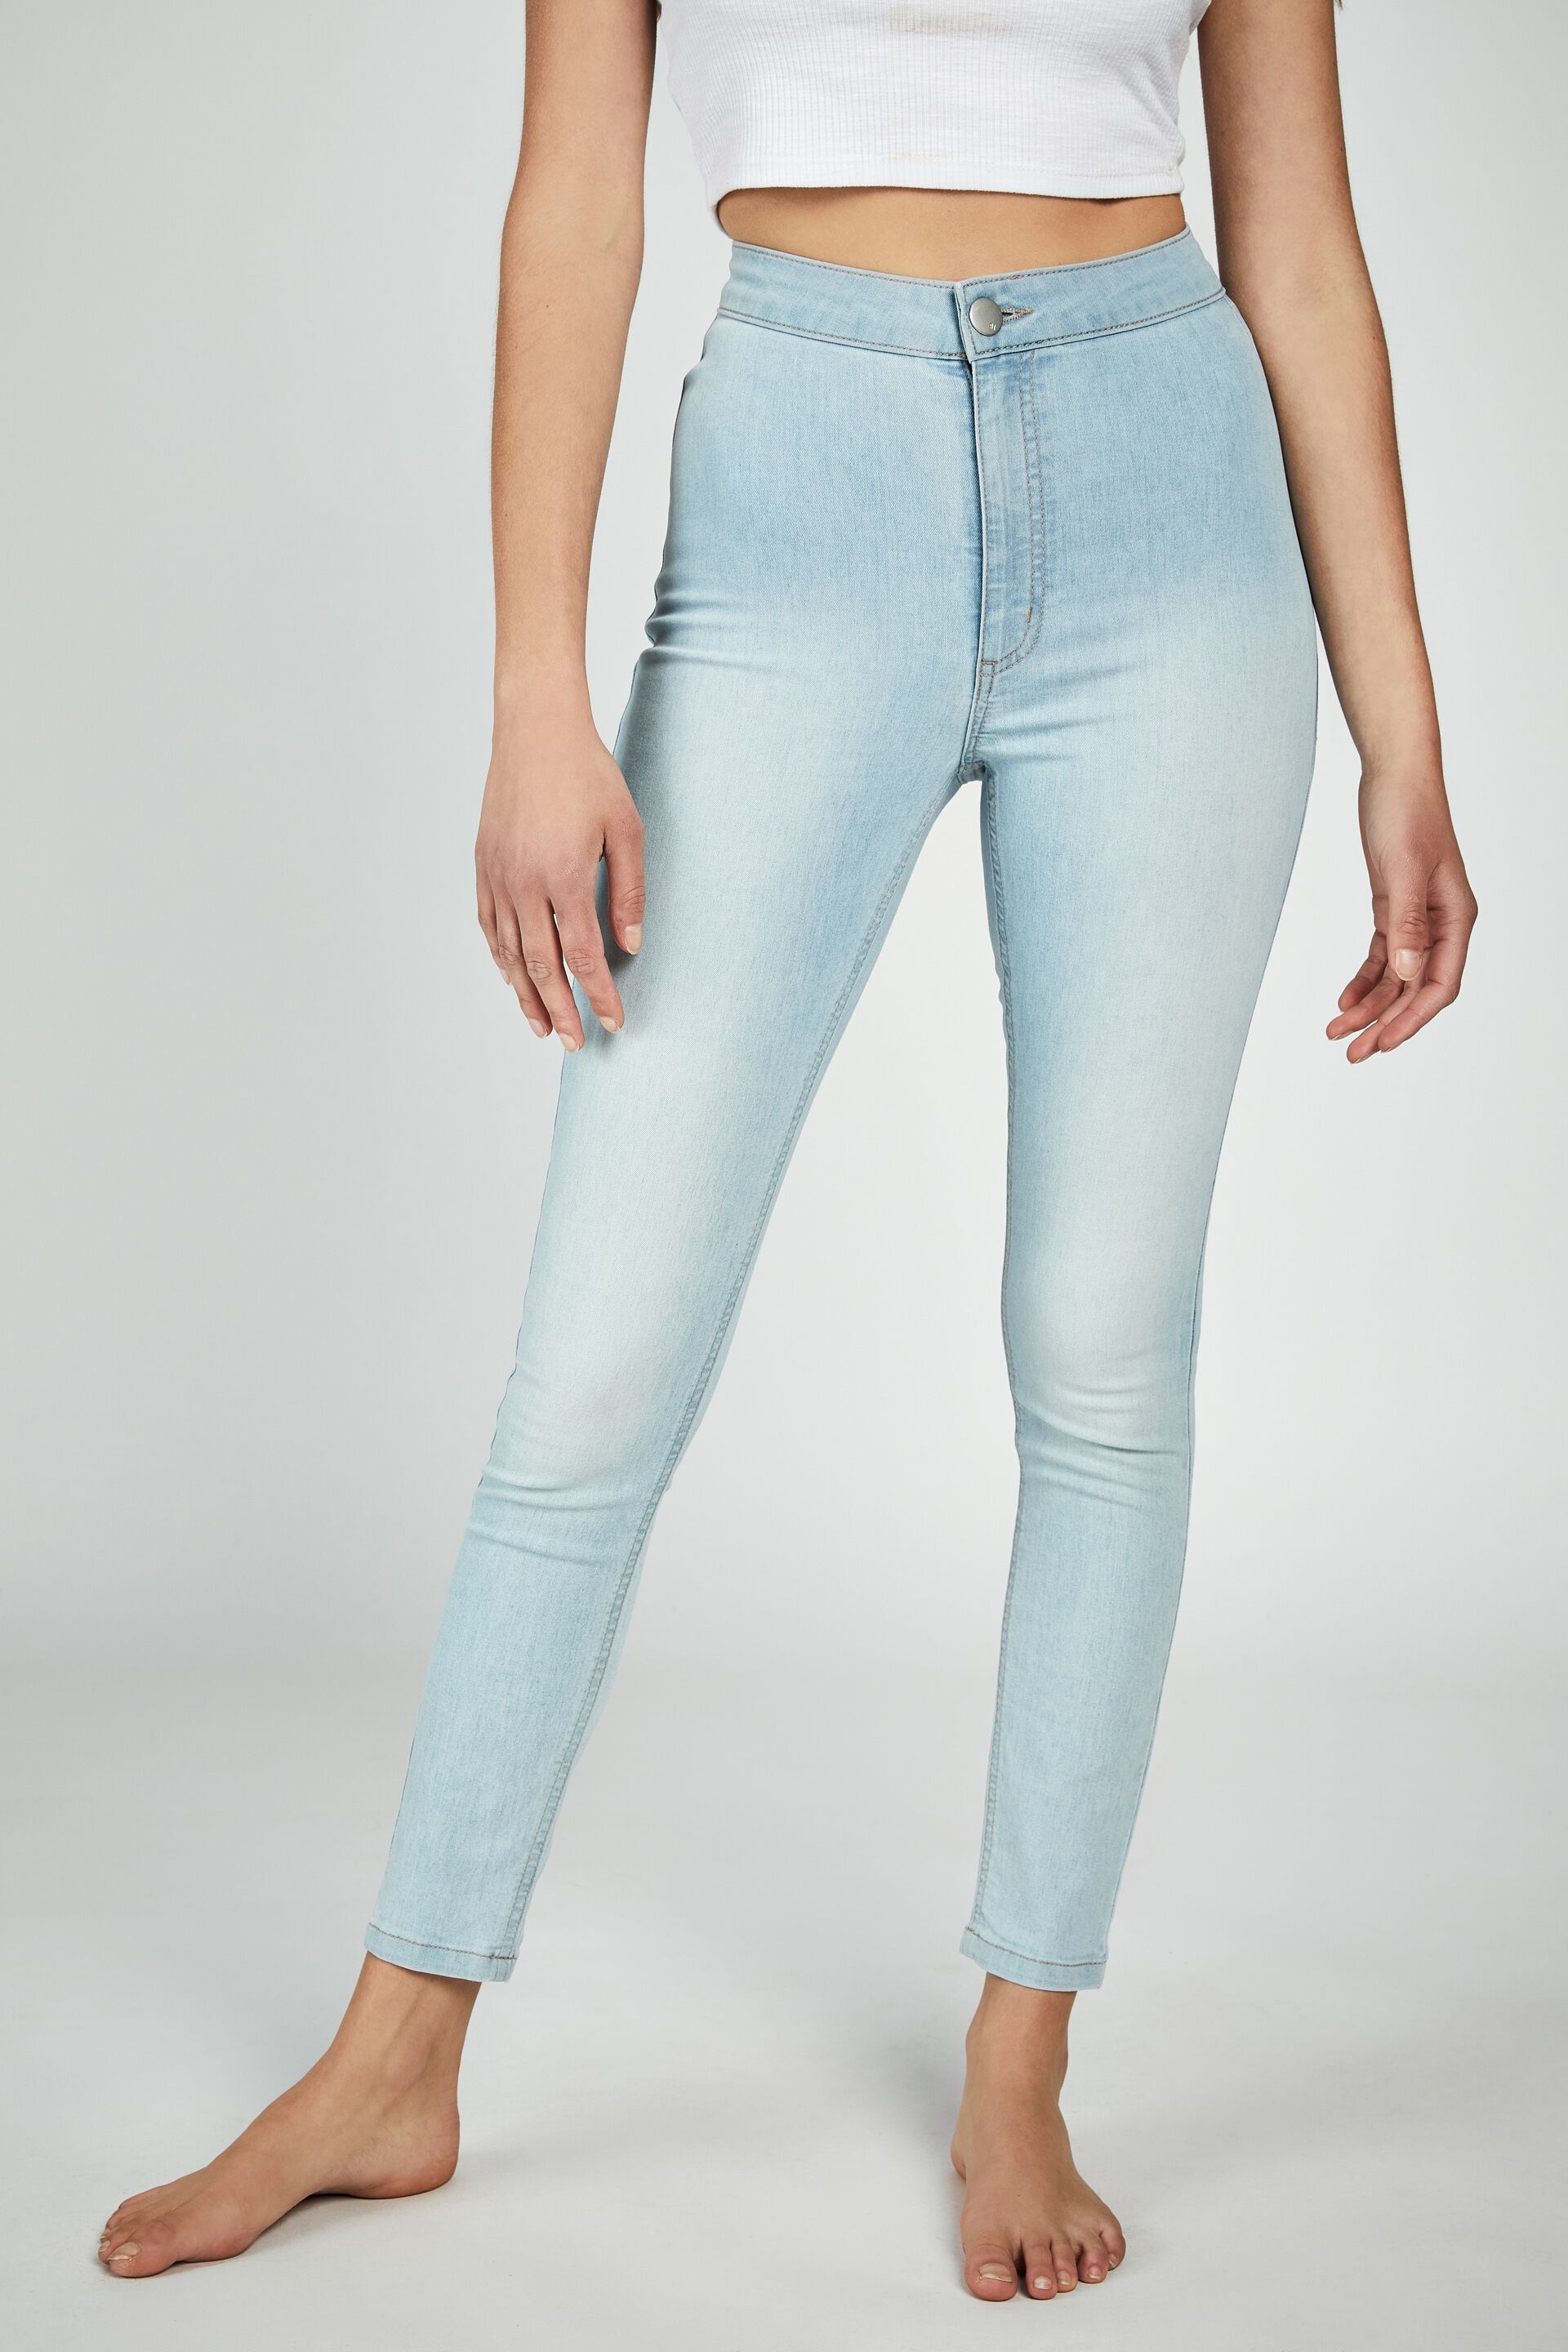 cotton on jeggings high rise